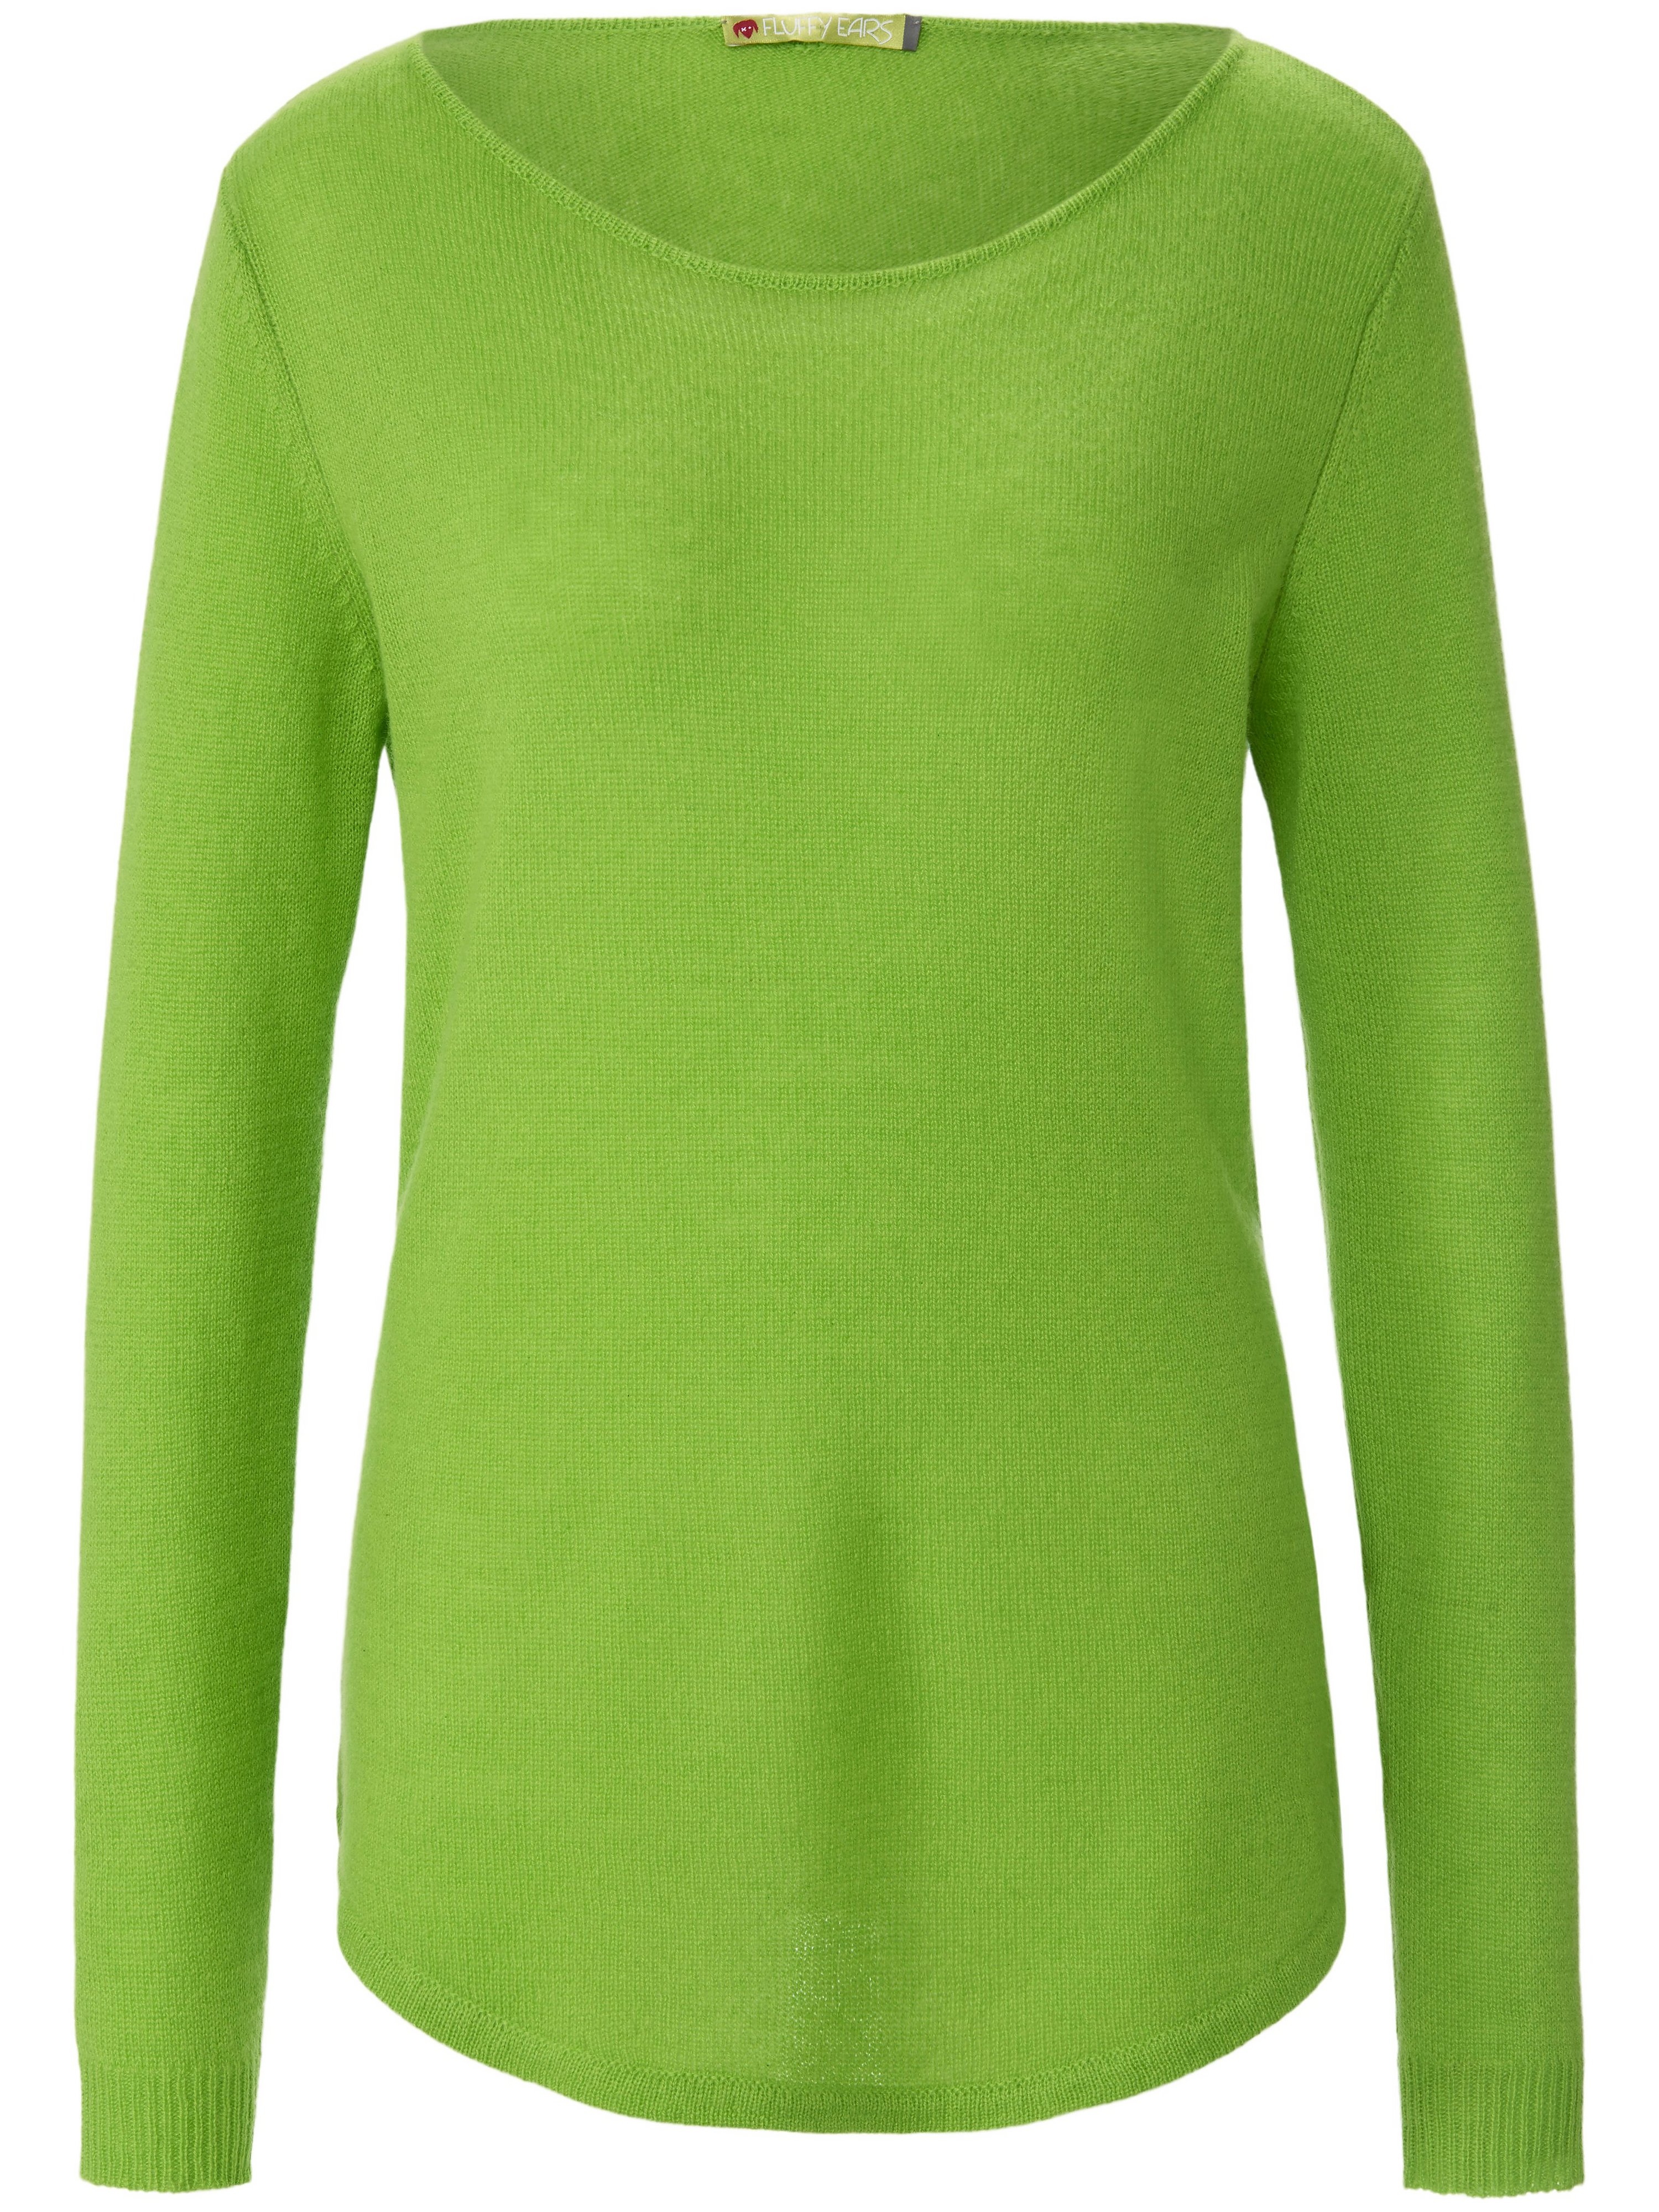 Le pull 100% cachemire  FLUFFY EARS vert taille 42